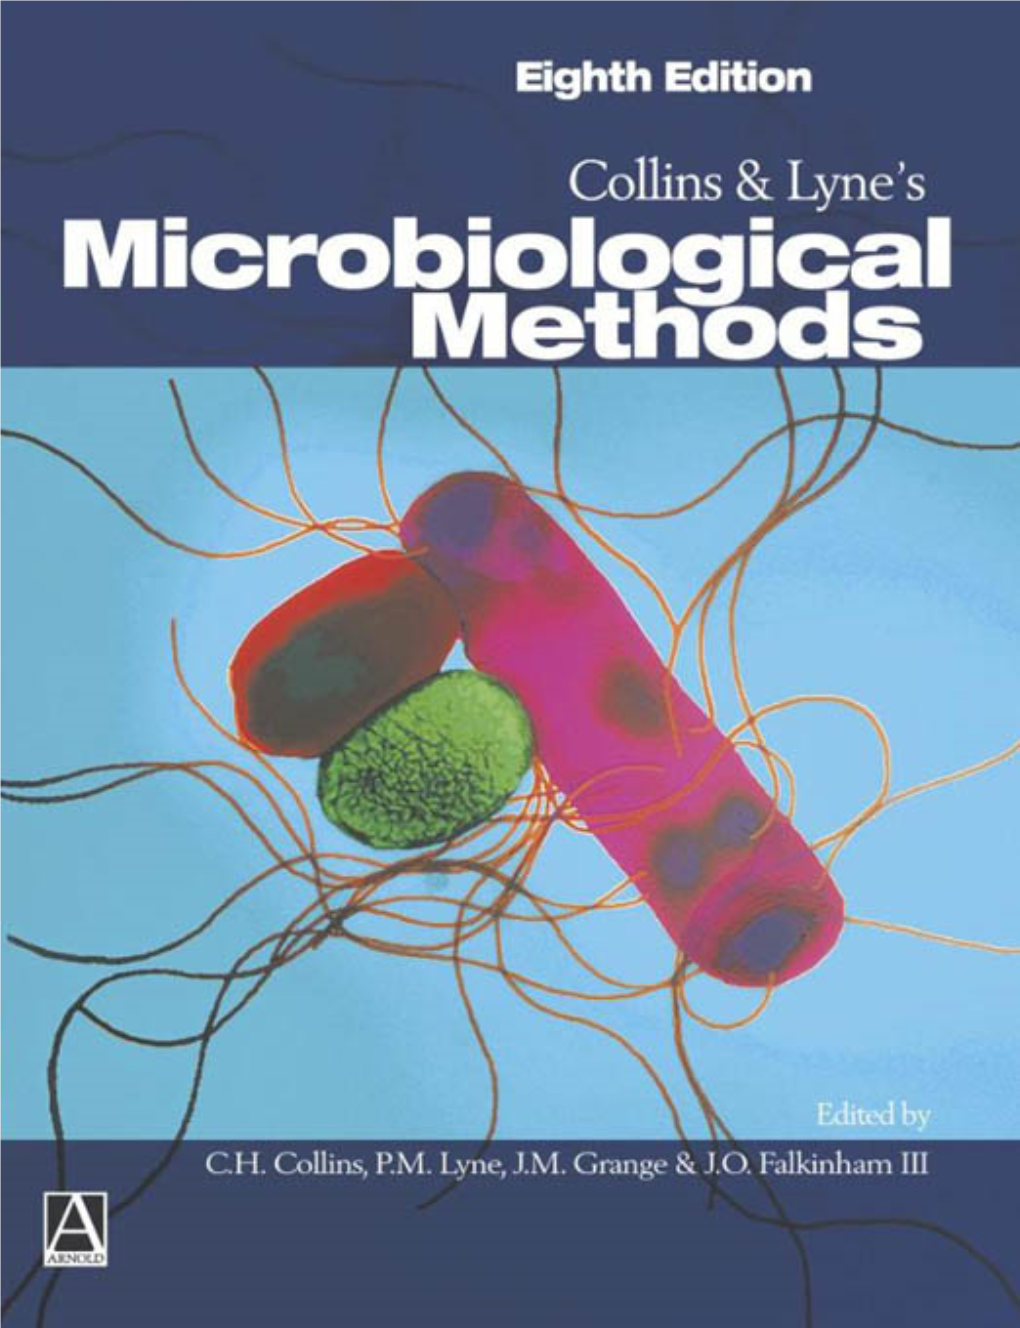 Microbiological Methods Eighth Edition This Page Intentionally Left Blank Collins and Lyne’S Microbiological Methods Eighth Edition